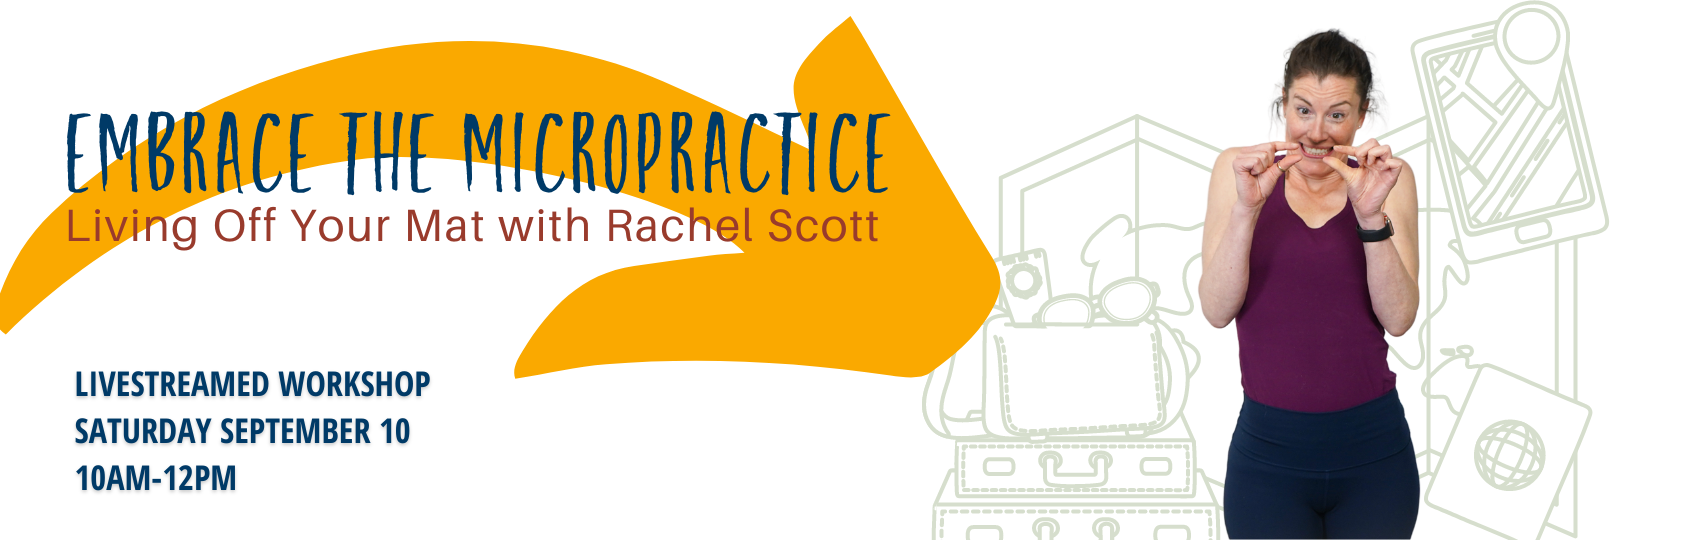 Embrace the Micropractice Workshop Banner